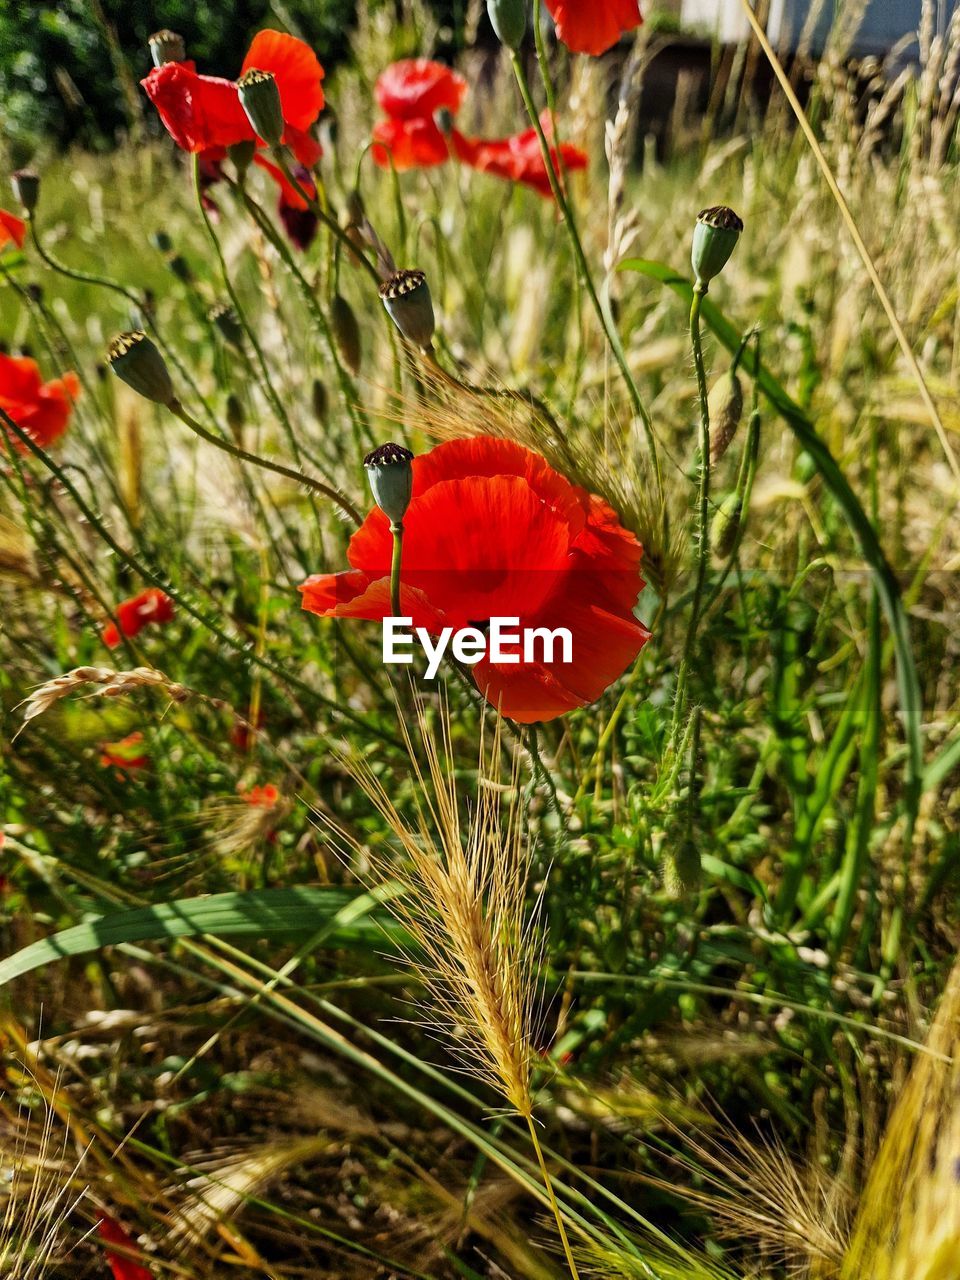 plant, red, flower, flowering plant, beauty in nature, growth, poppy, nature, freshness, grass, fragility, meadow, close-up, wildflower, petal, no people, flower head, inflorescence, prairie, day, field, land, outdoors, focus on foreground, green, botany, sunlight, plant stem